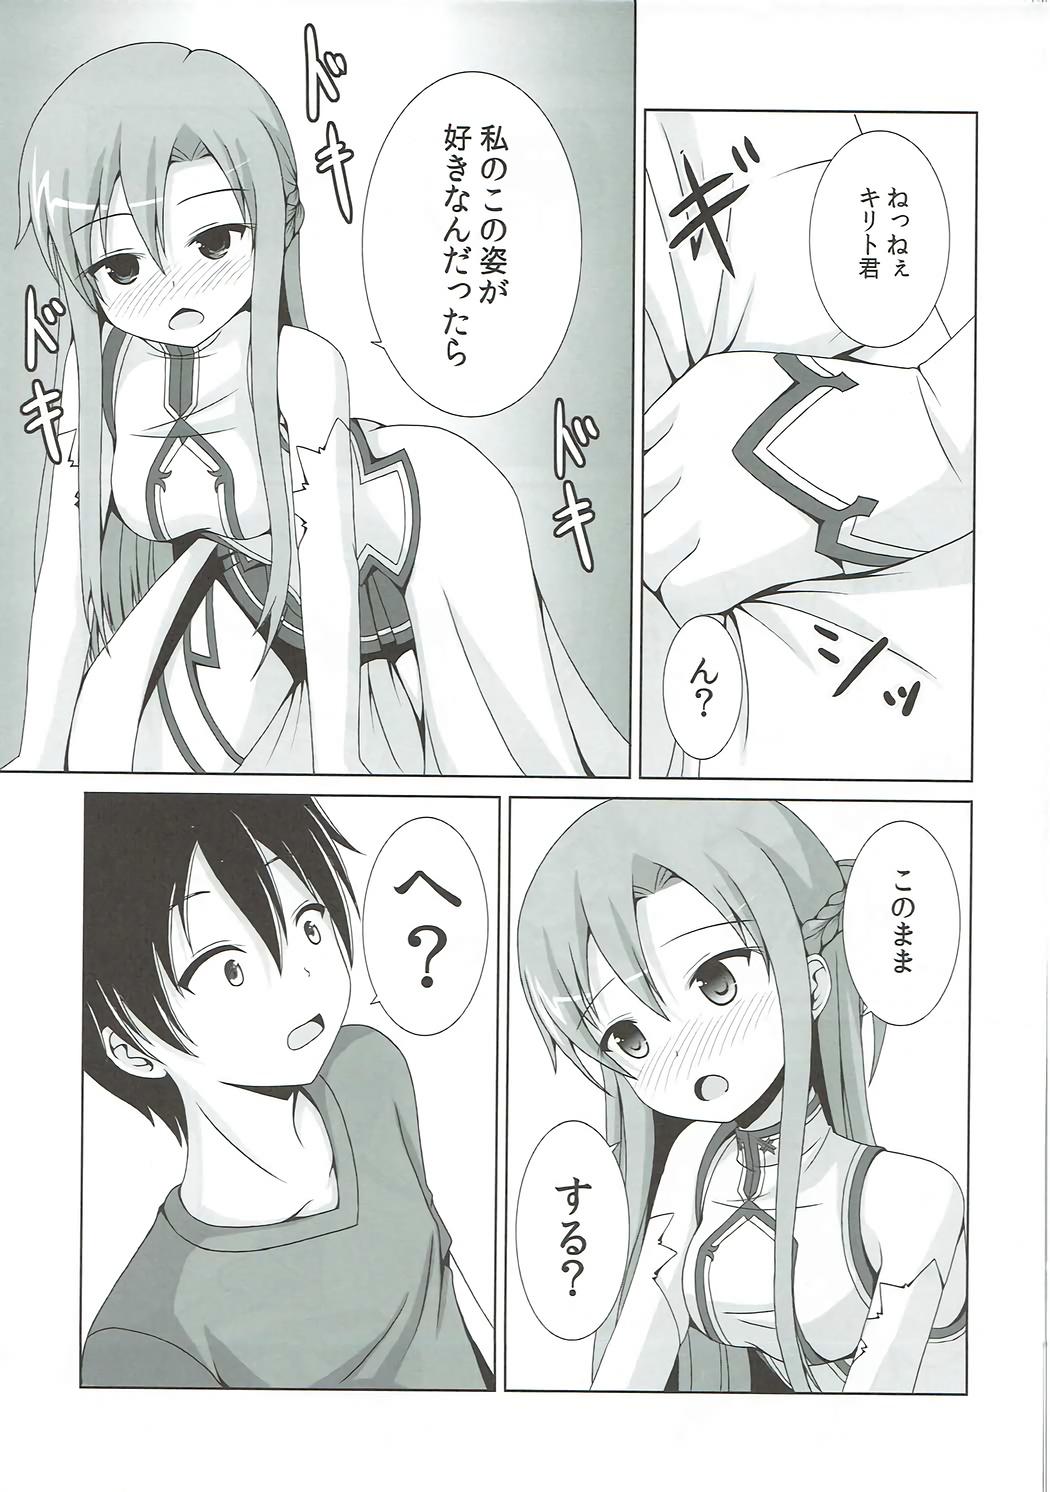 Old Young Kessen Zenjitsu no Etcetera - Sword art online Young Old - Page 8